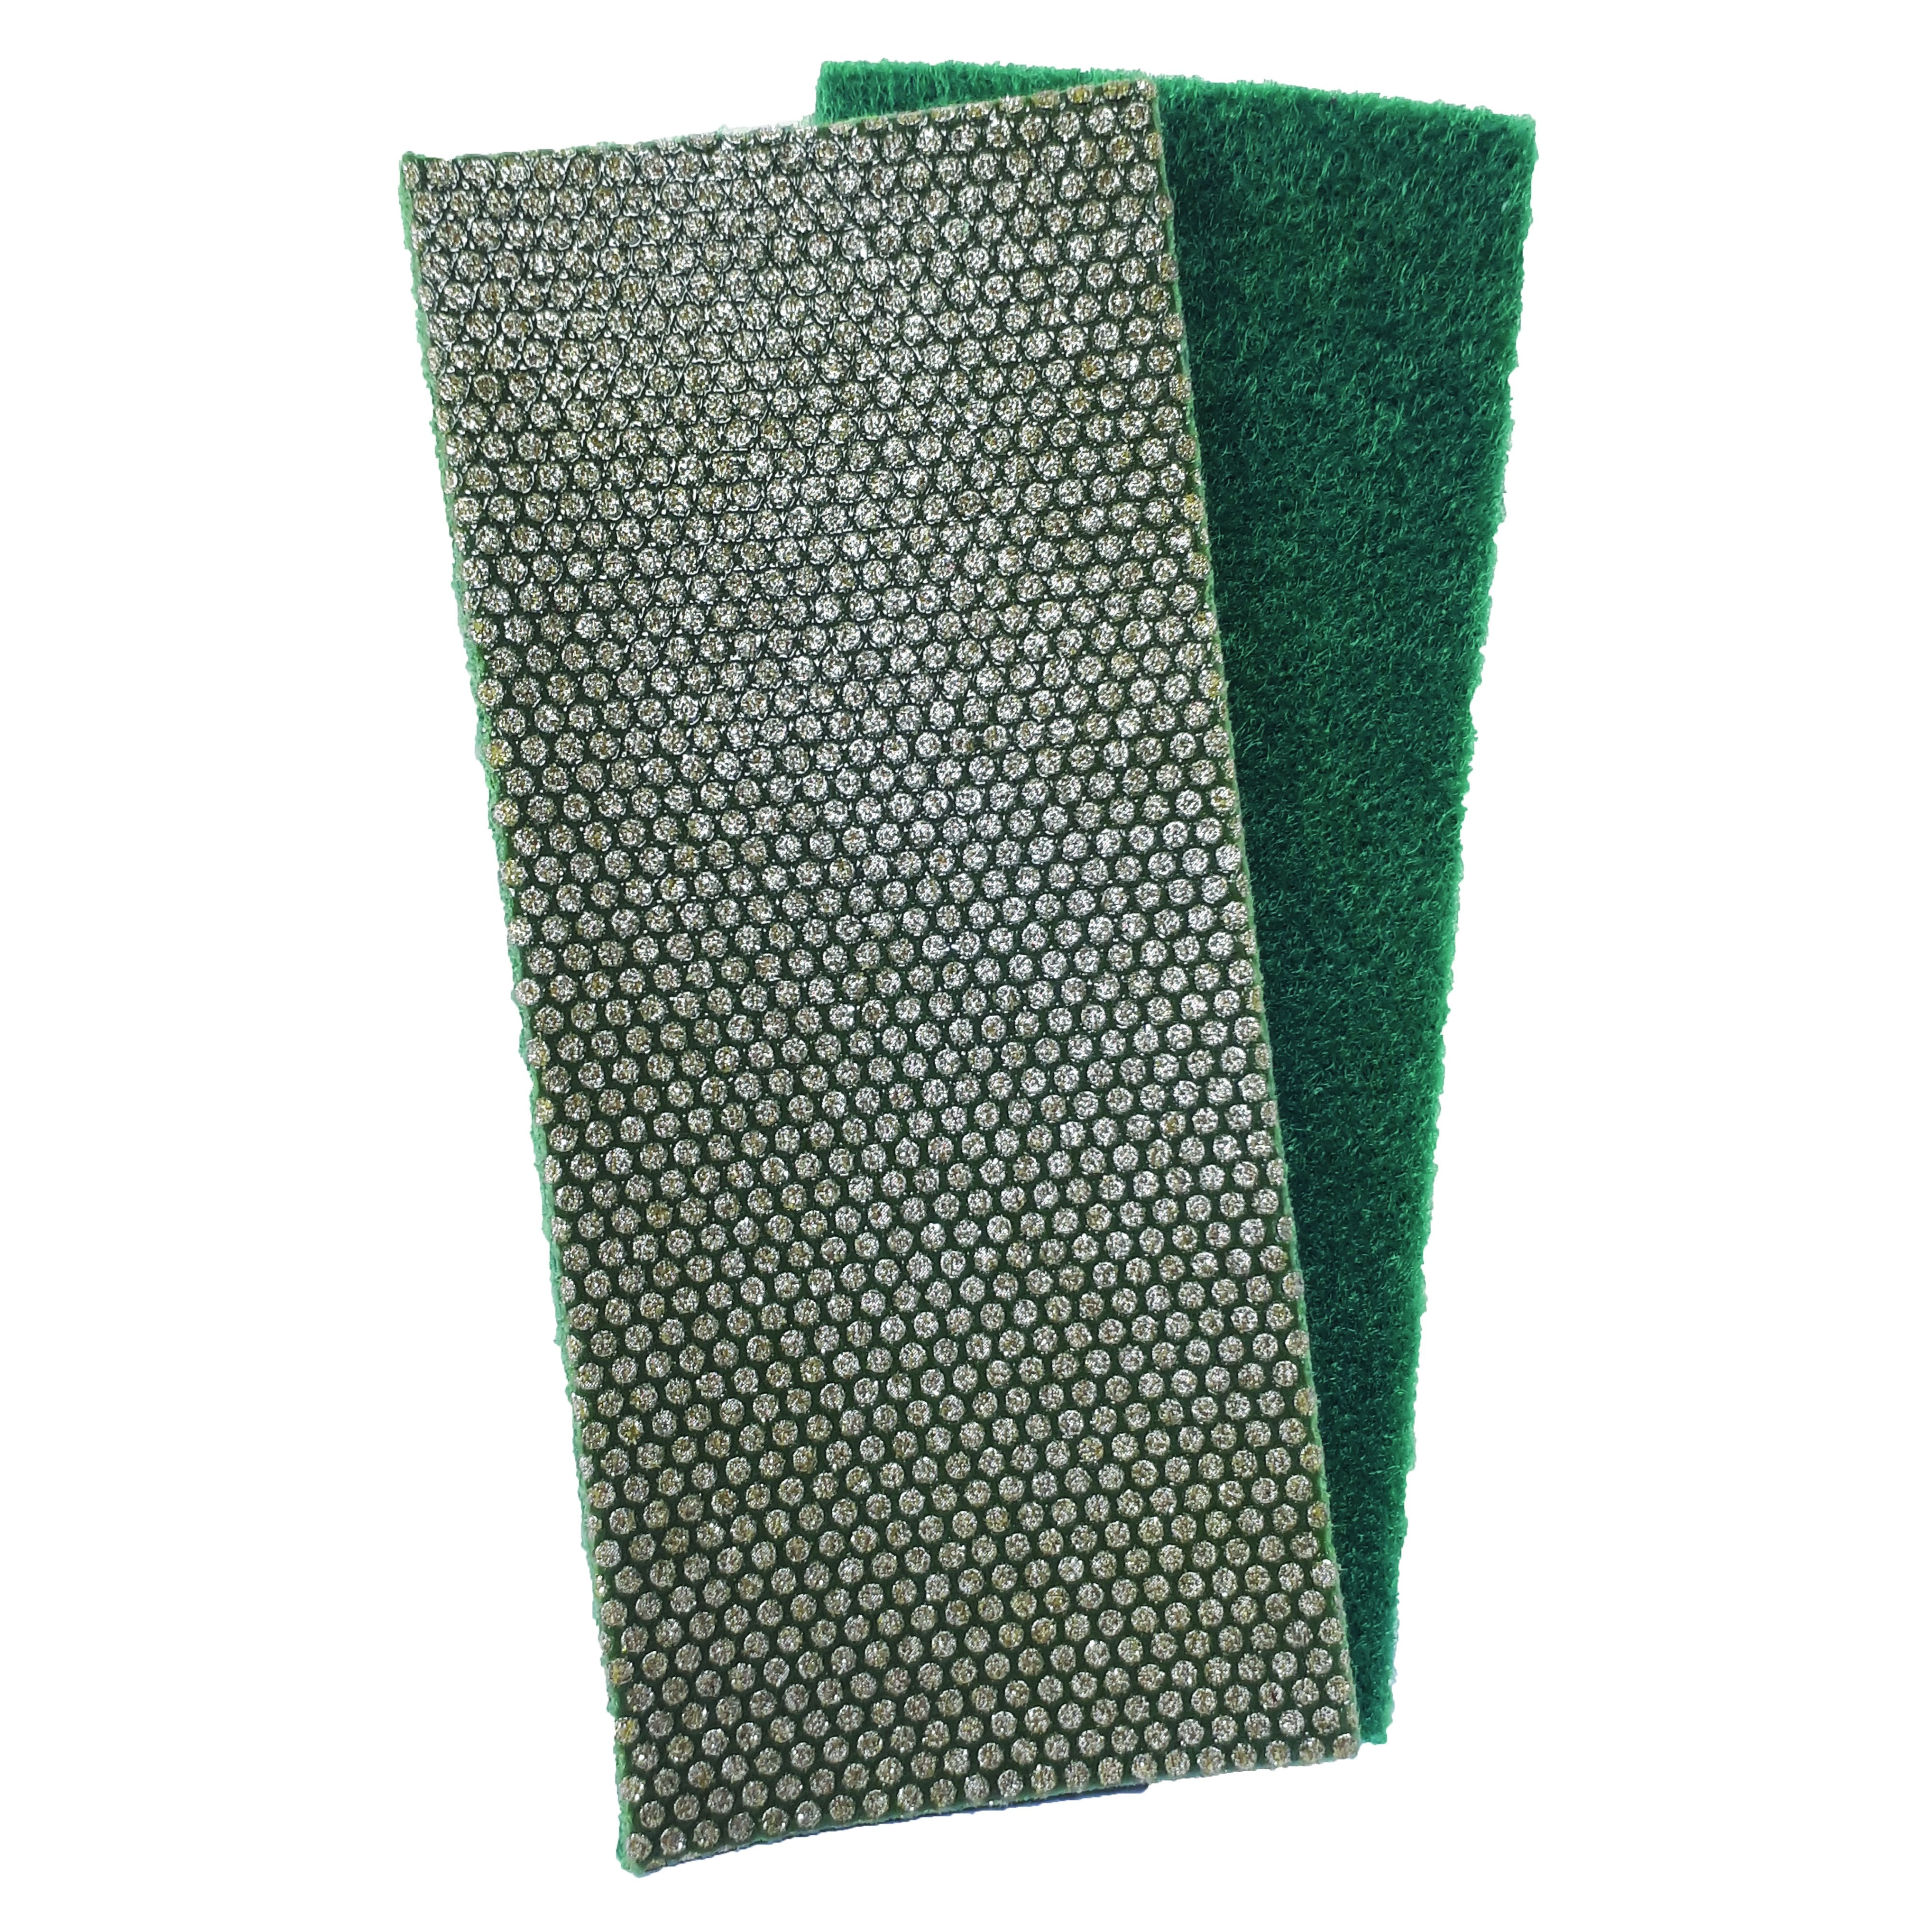 QUICK RELEASE HAND POLISHING PADS